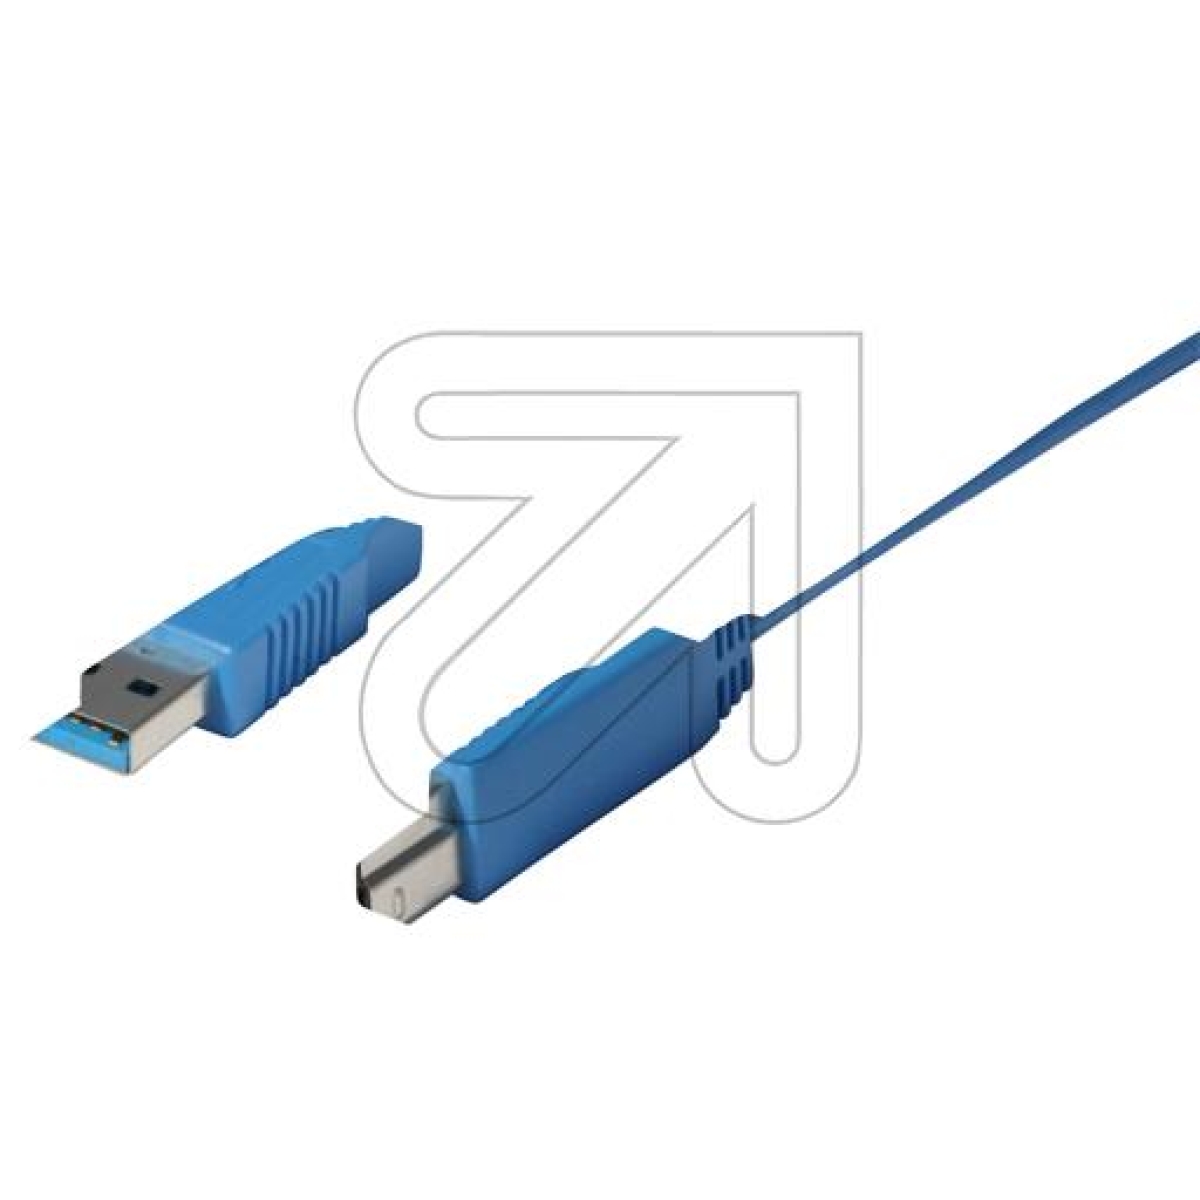 EGBUSB cable 3.0 A/B 1.8 m CO 77032Article-No: 353885